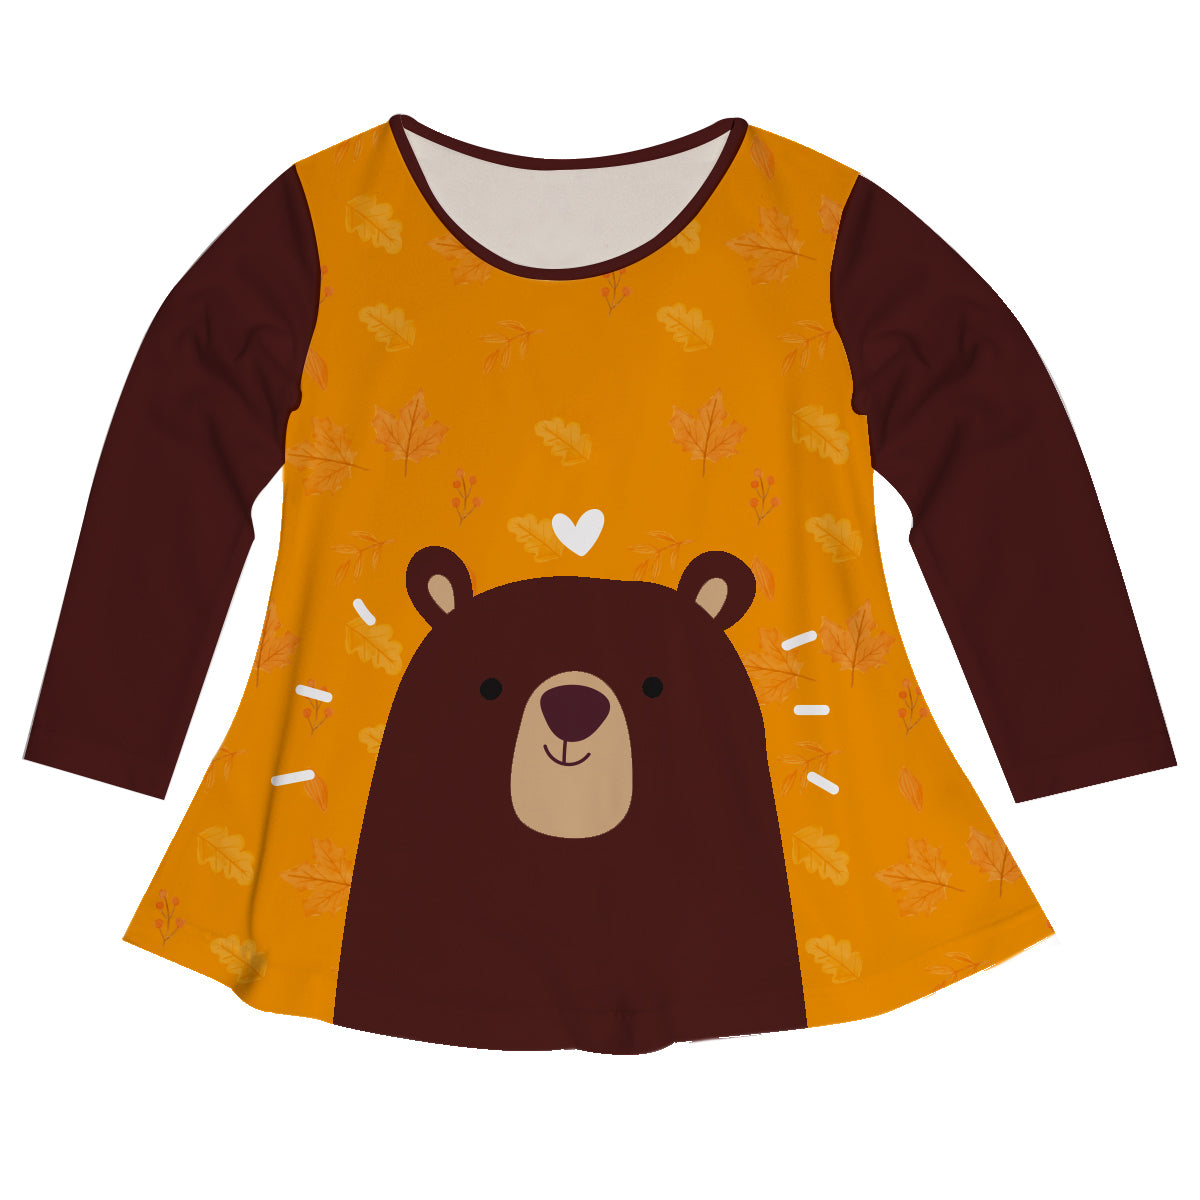 Girls black and brown bears blouse with monogram - Wimziy&Co.